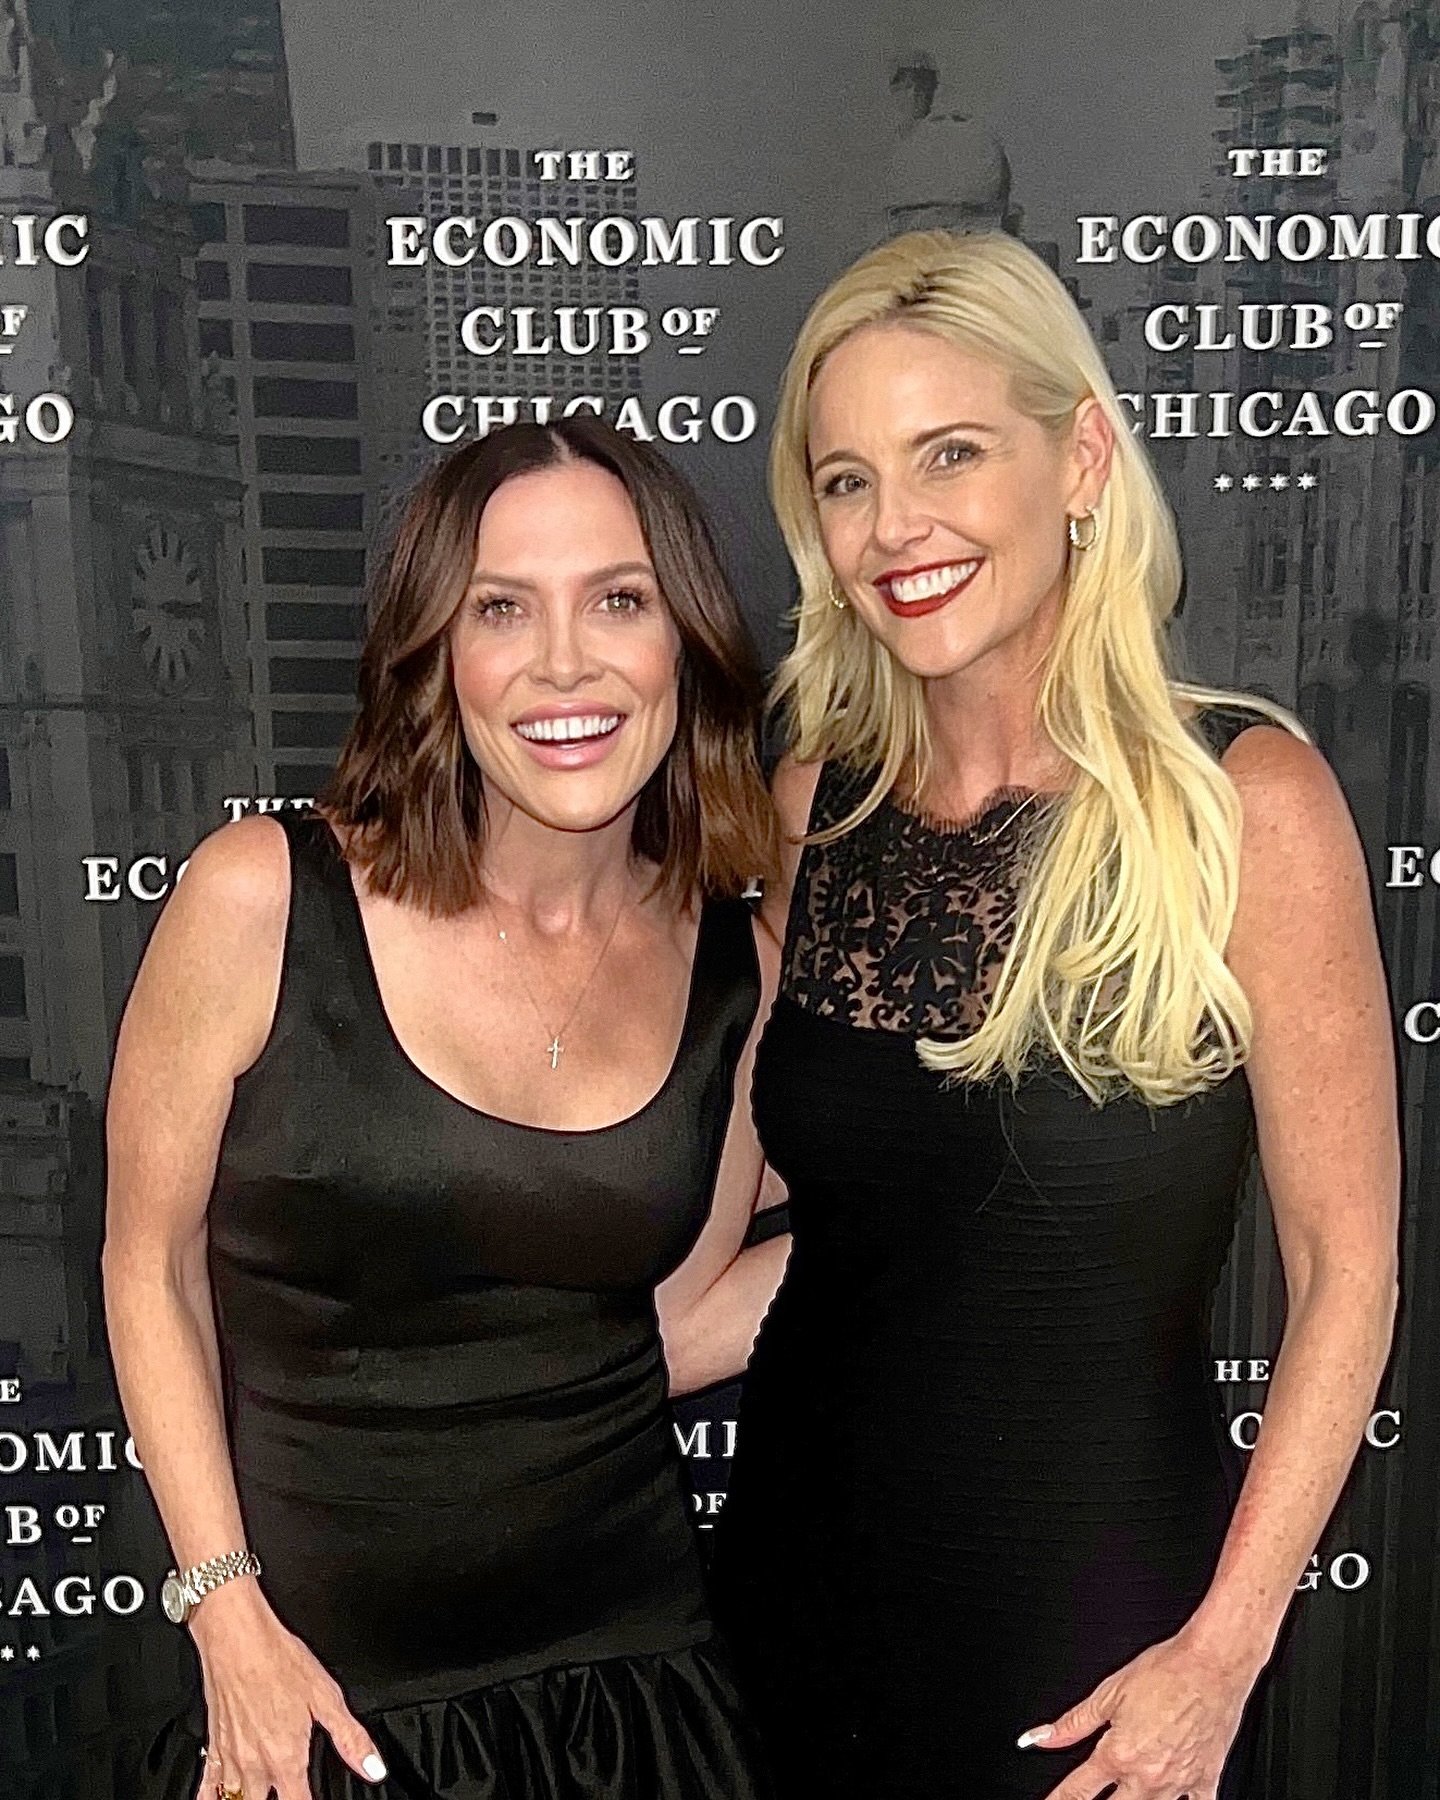 Its official&hellip;. @econclubchi dinner as a NEW MEMBER!!! People sometimes forget that I not only host the show and yes, I&rsquo;m the chief inspiration officer, yet I also own it.

To be in a room with high-stakes leaders, main descion makers &am